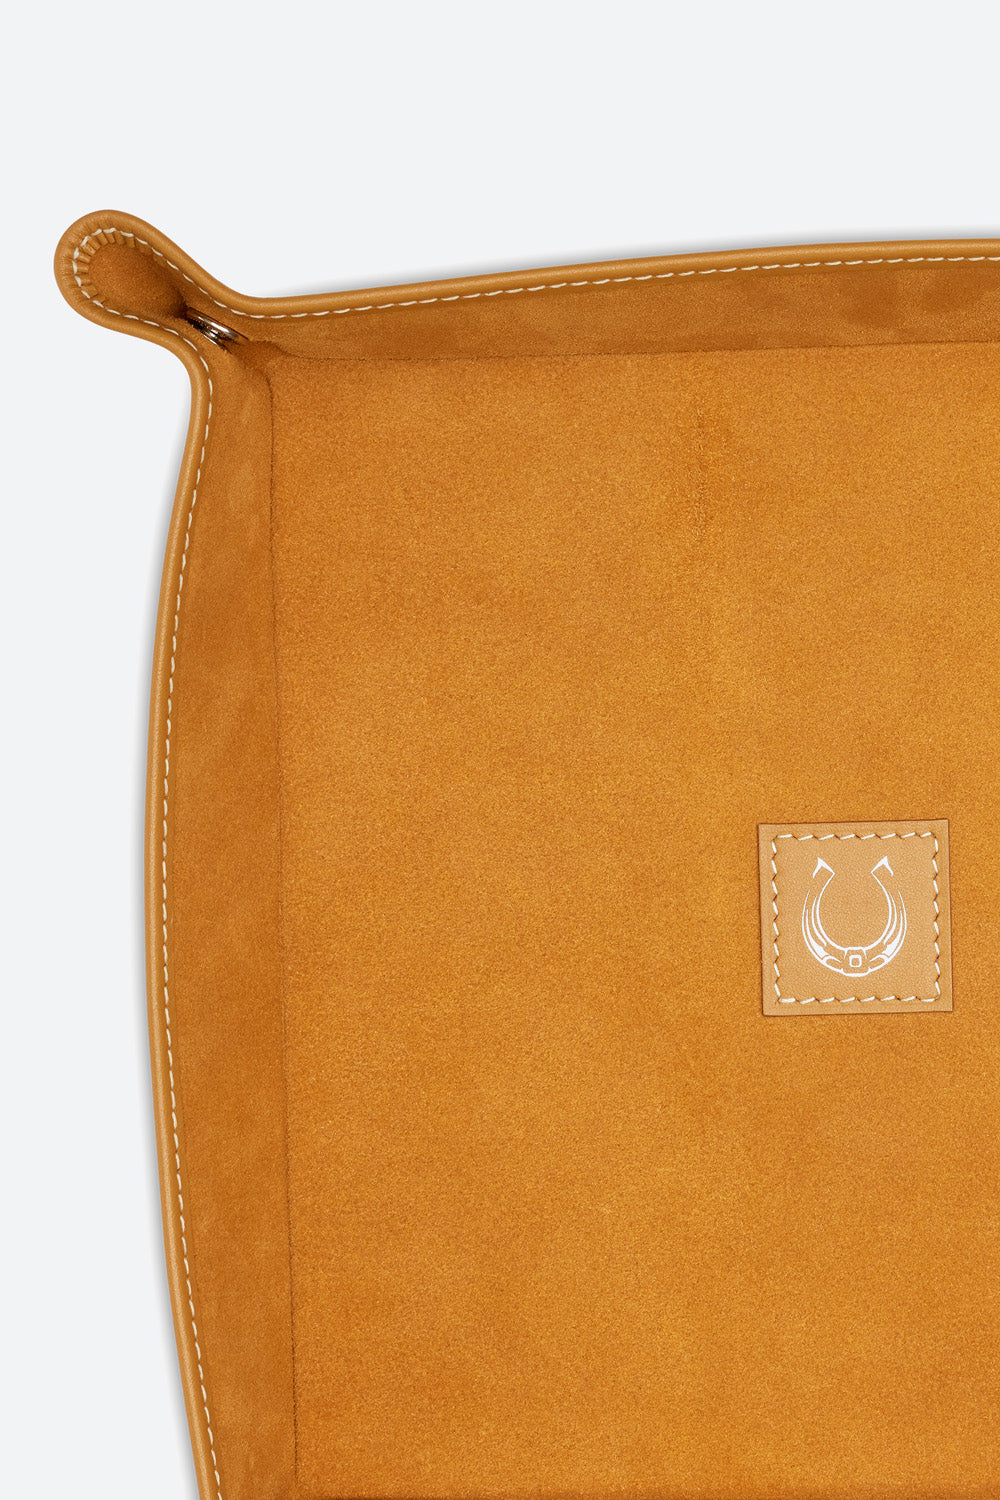 Large Square Leather Valet Tray in Apricot